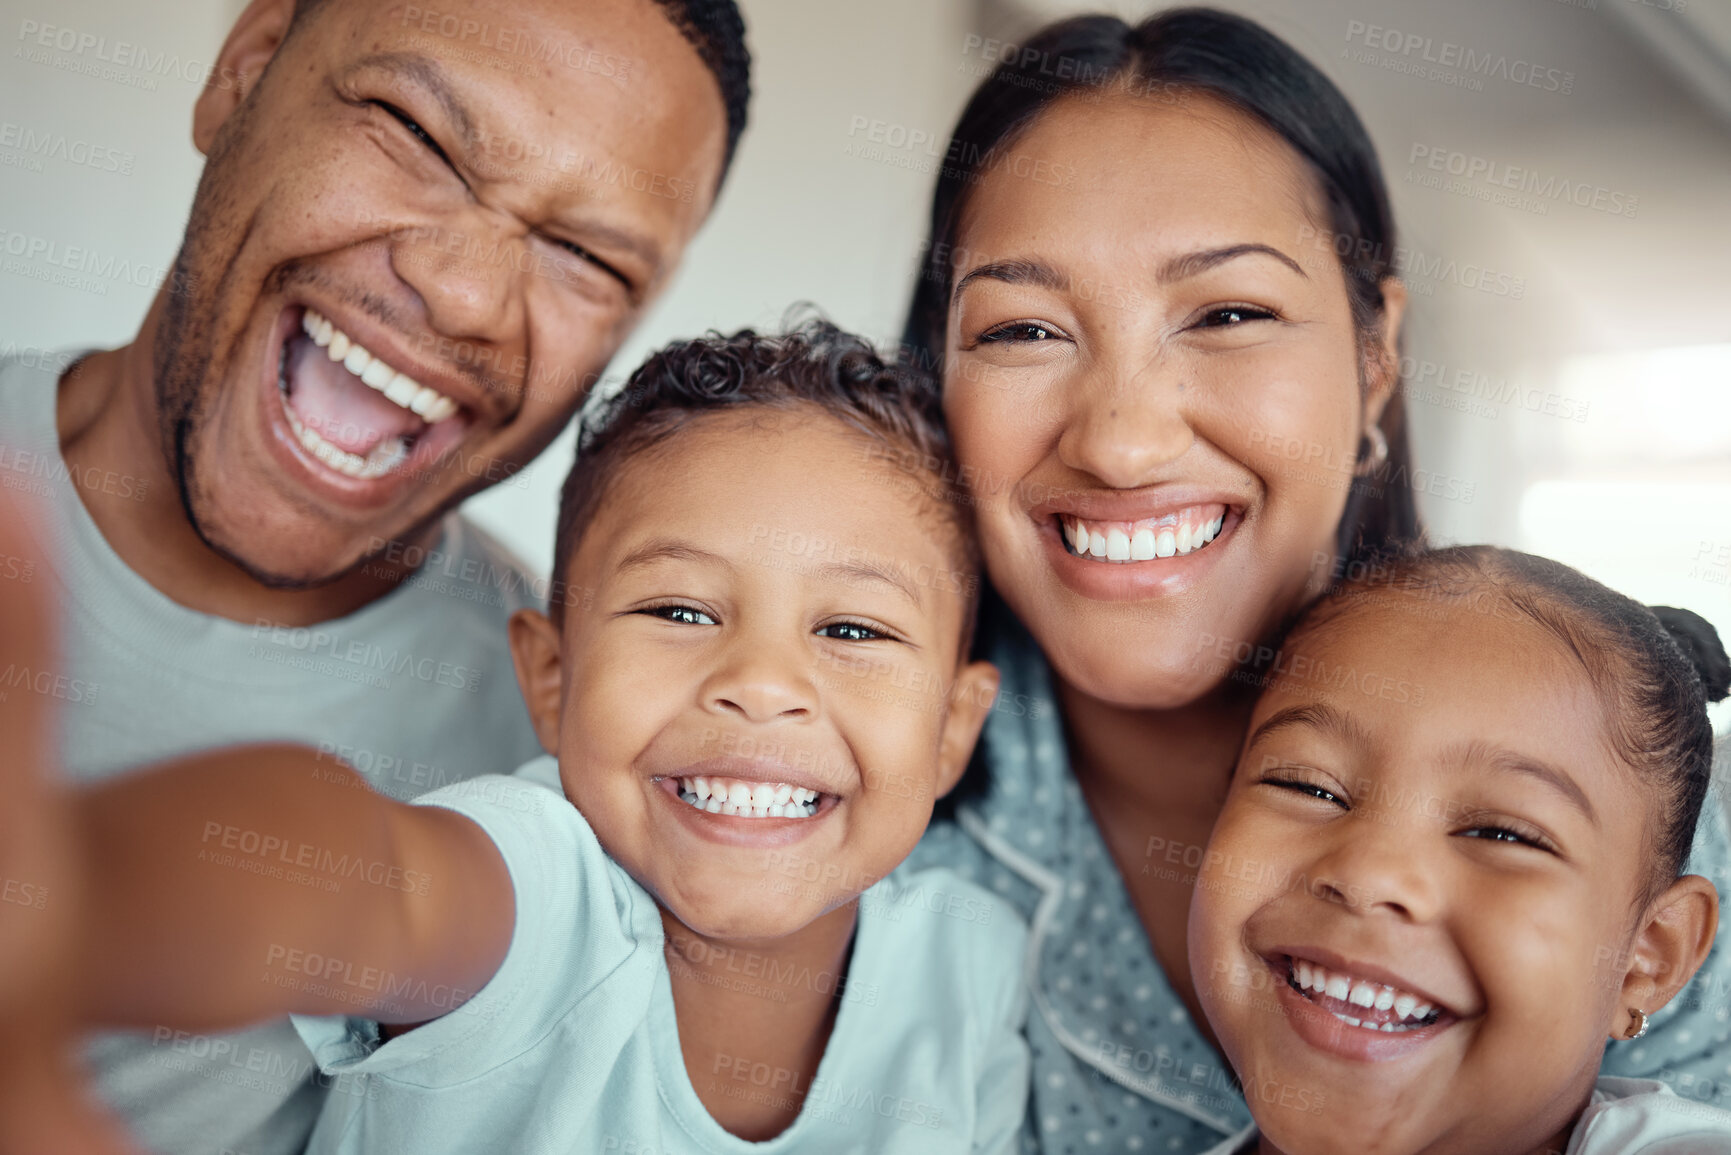 Buy stock photo Cute little boy holding phone and taking selfie or recording funny video with his family. Happy mixed race family with two children and parents posing together for a family picture on a mobile phone